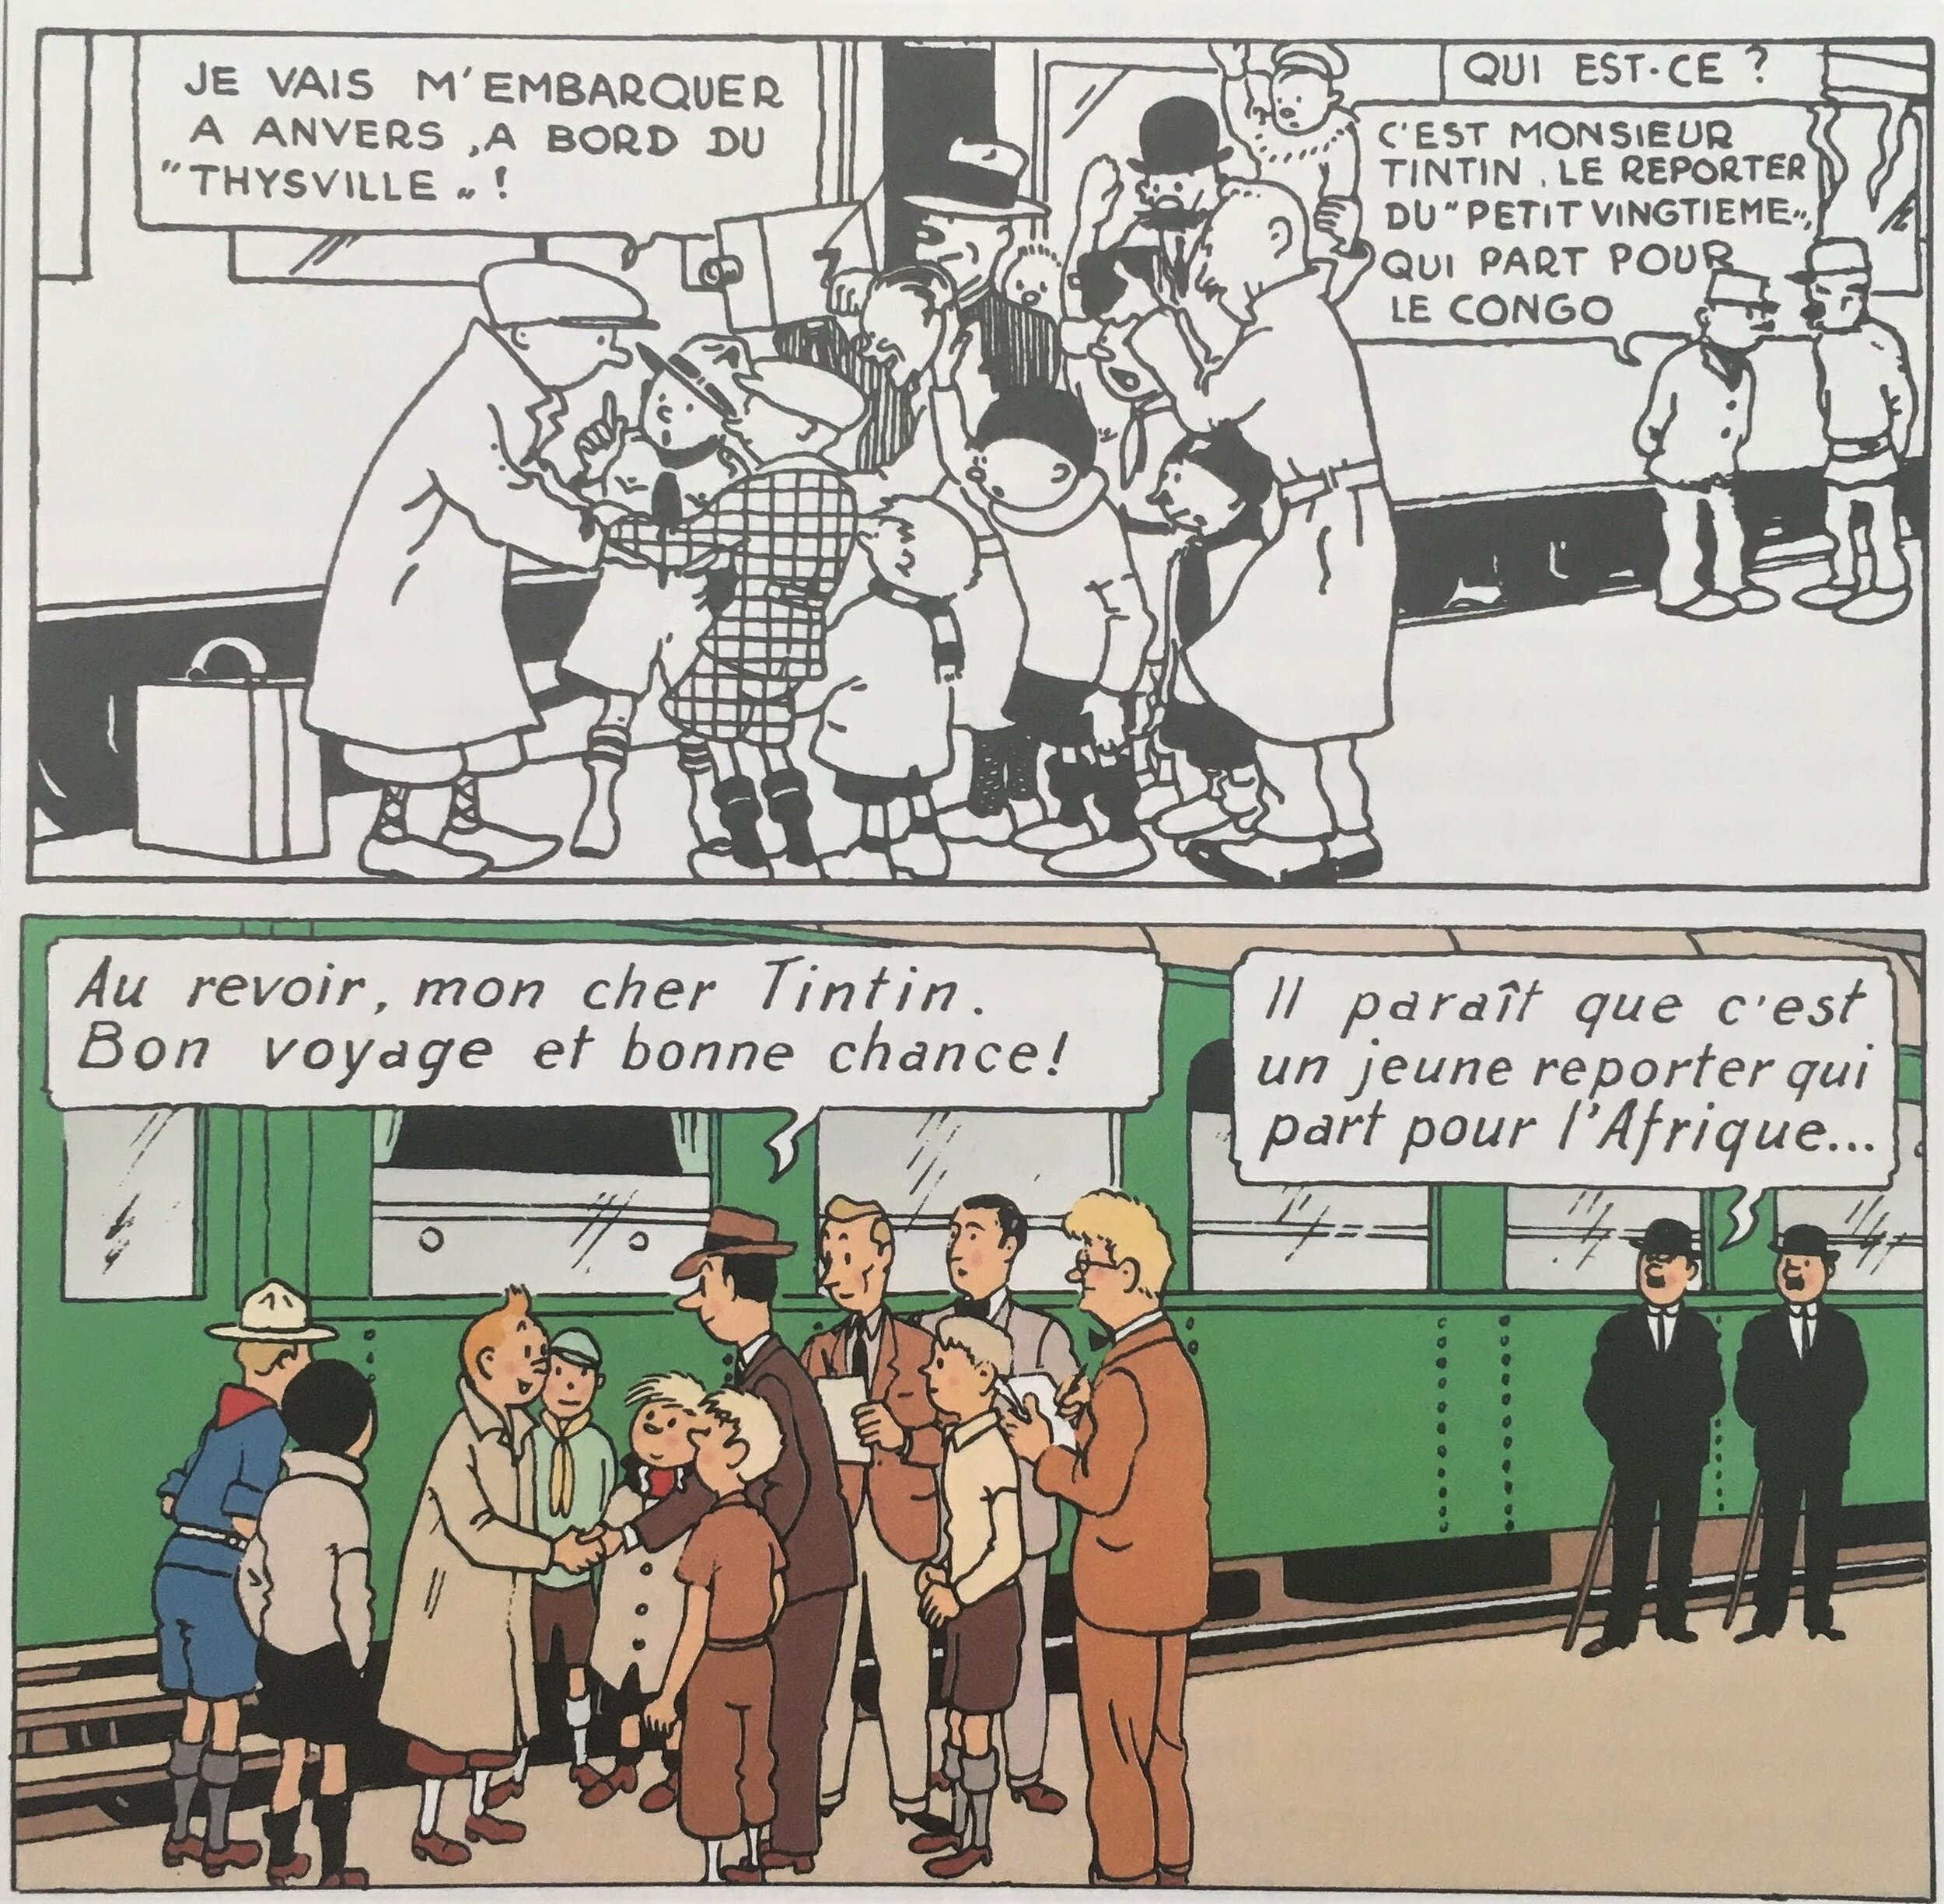  The opening panel was changed in the 1946 edition to include contemprary characters Thompson and Thomson. Herge includes himself as the blonde journalist with a long nose.  Farr, Michael.  Tintin: the Complete Companion . Egmont, 2011. 